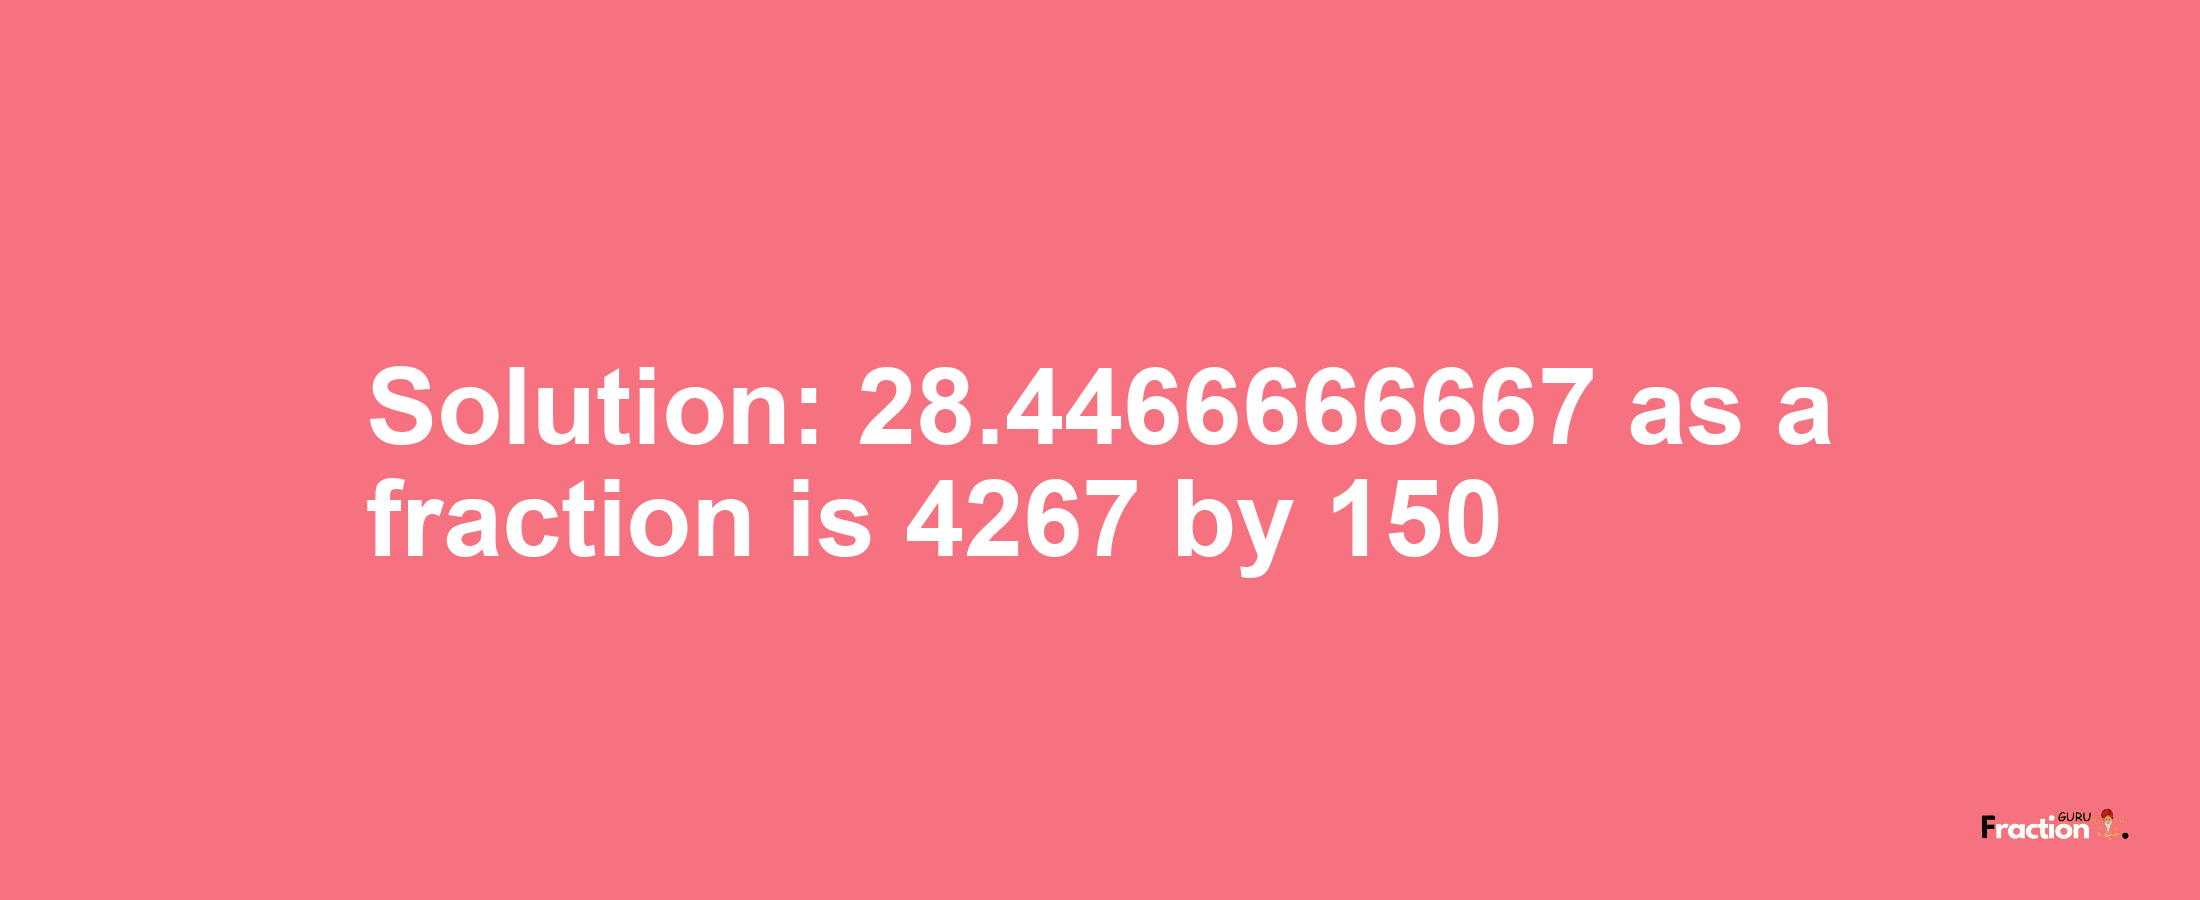 Solution:28.4466666667 as a fraction is 4267/150